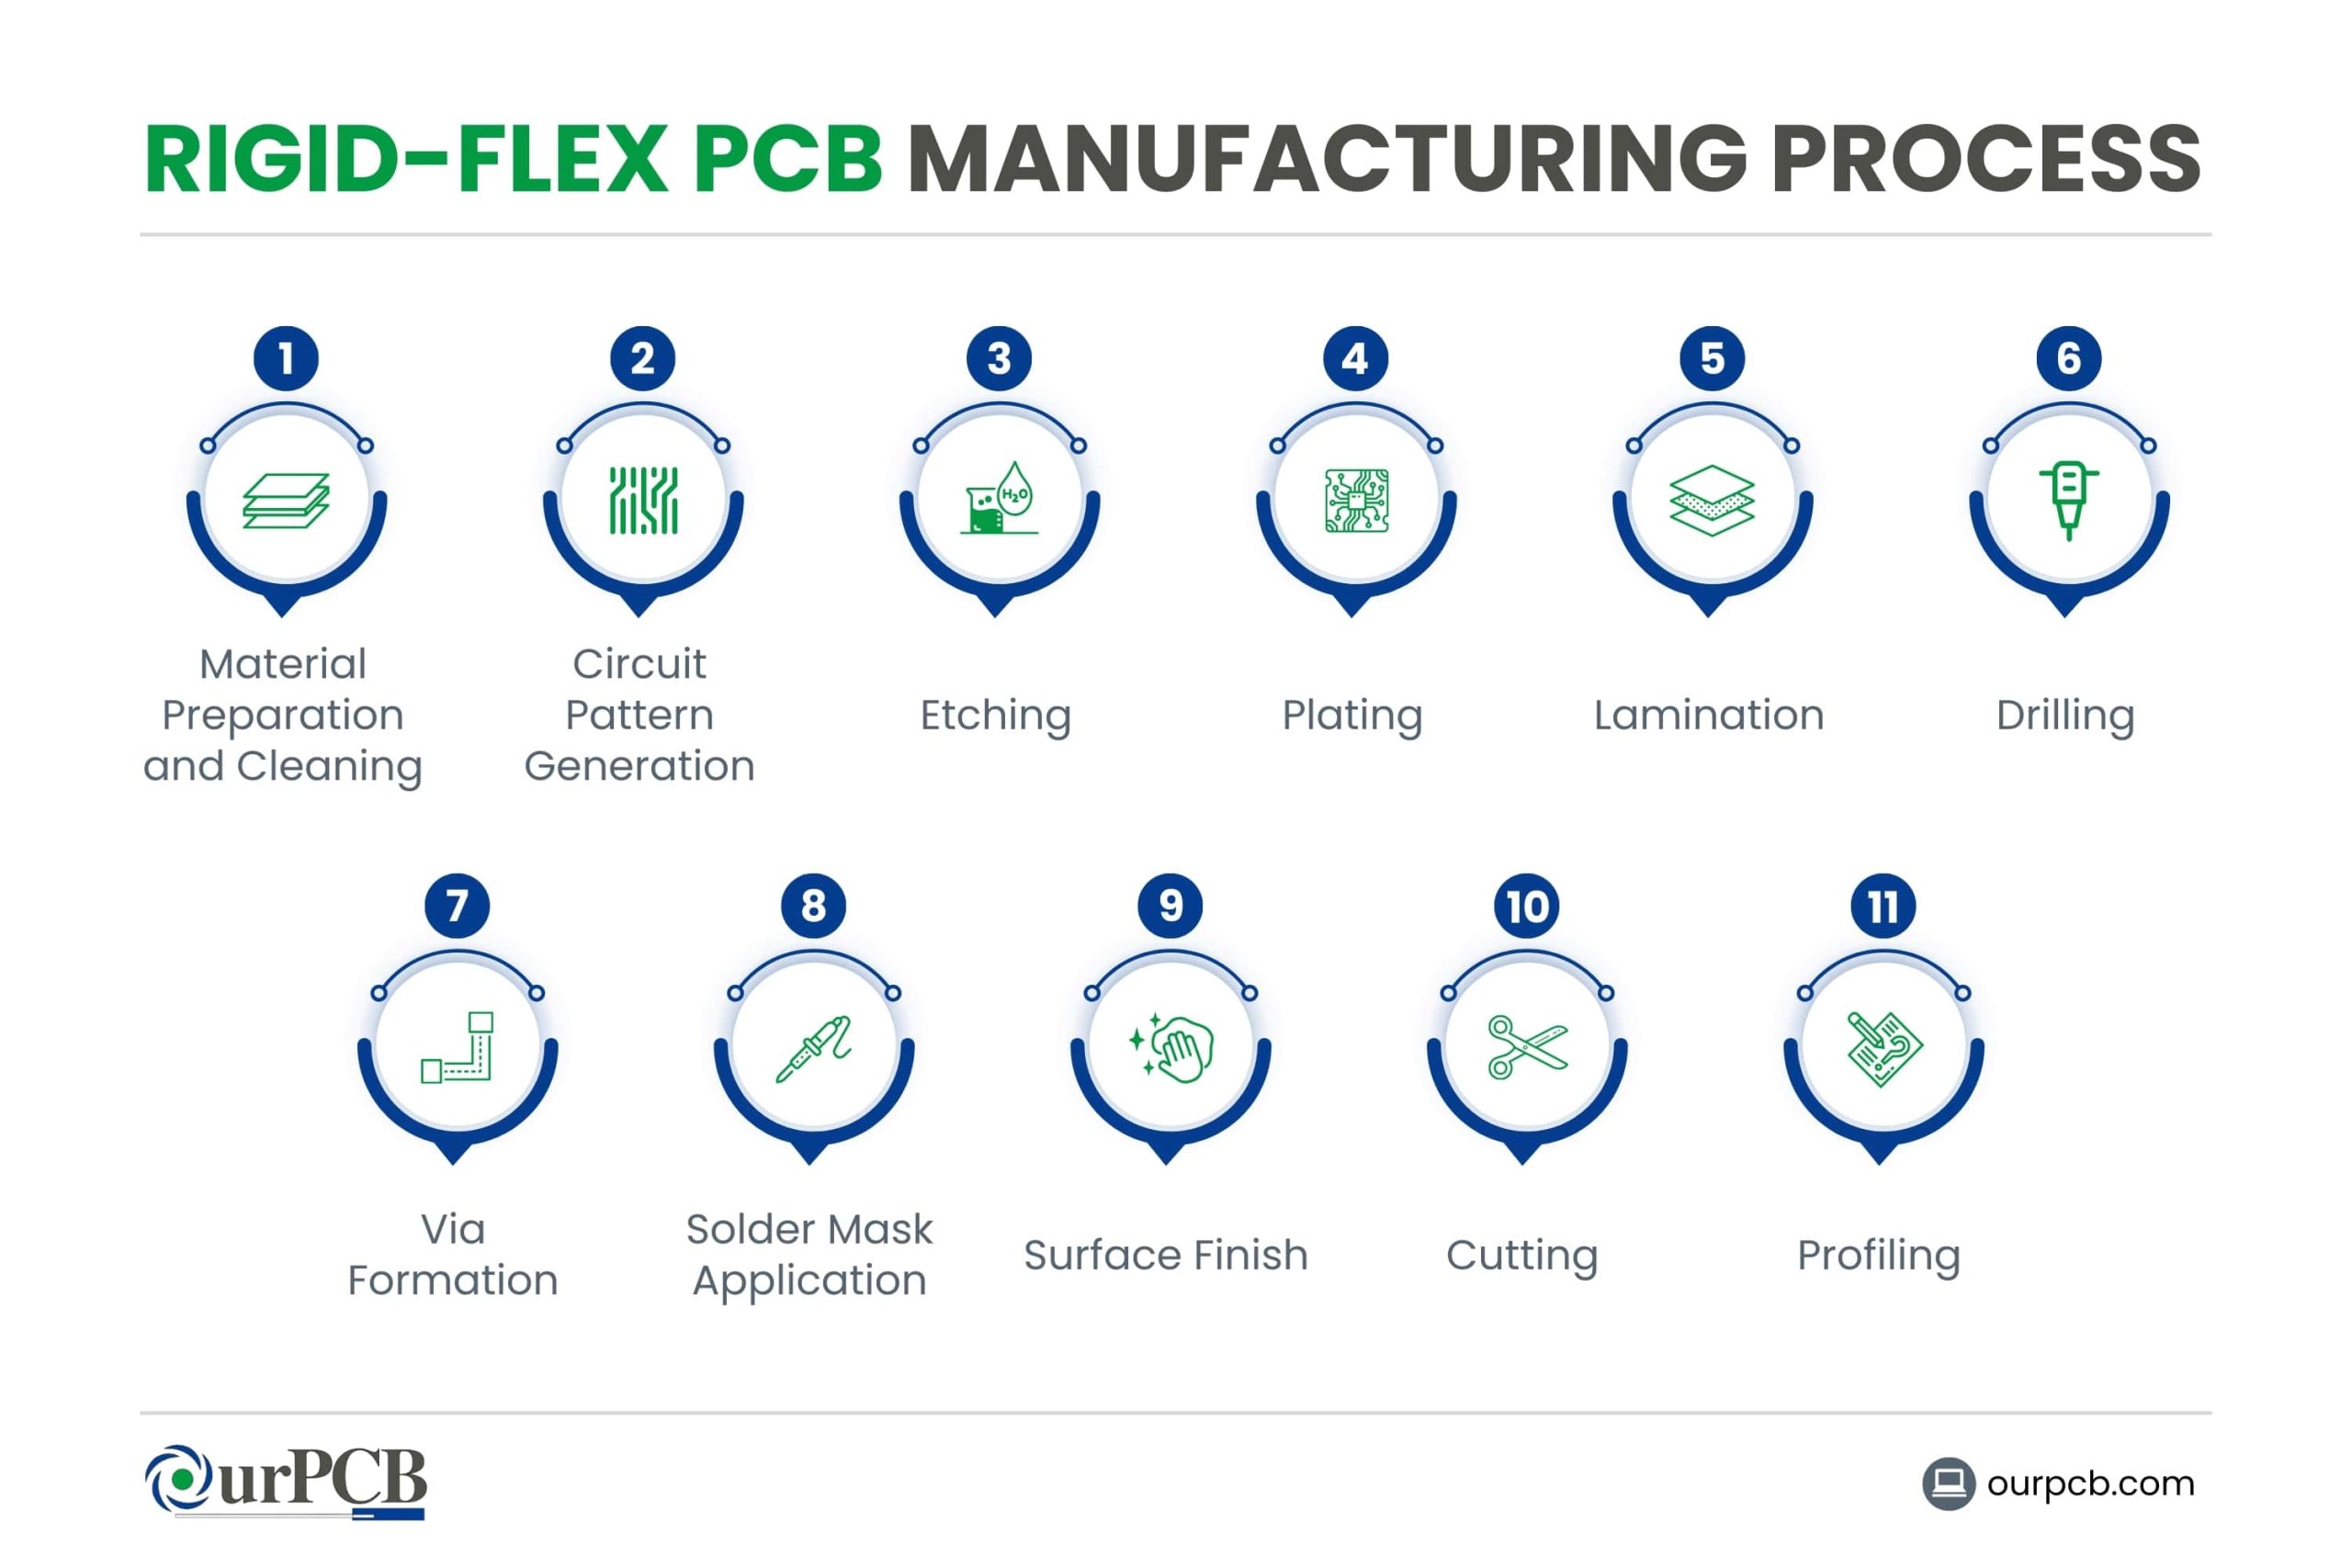 What Is the Rigid-Flex PCB Manufacturing Process?